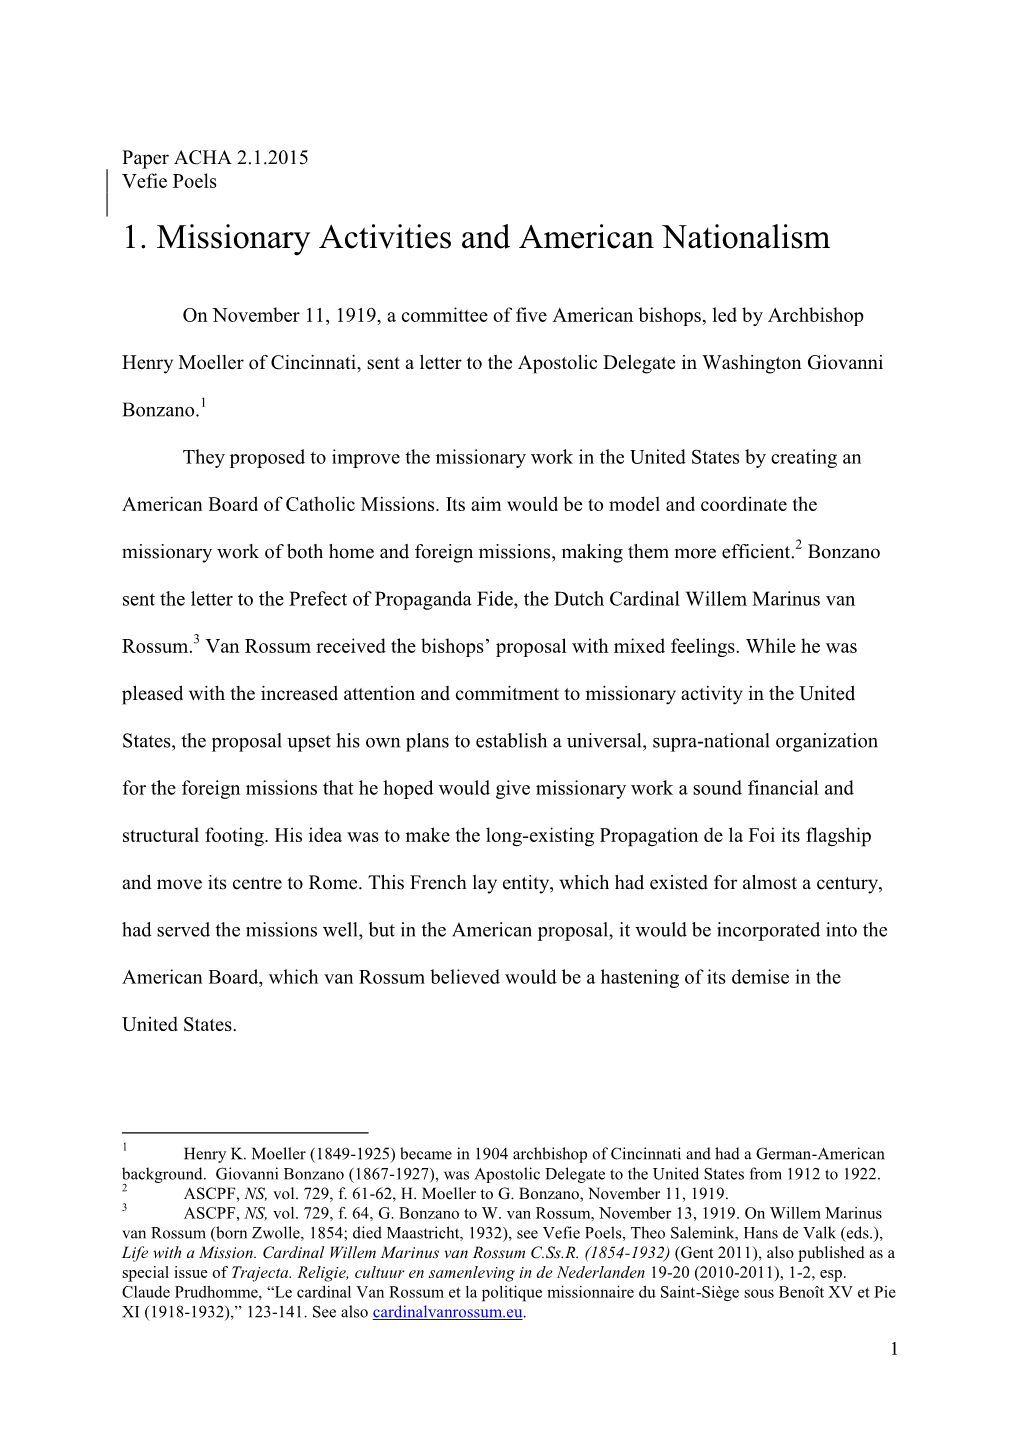 Missionary Activities and American Nationalism